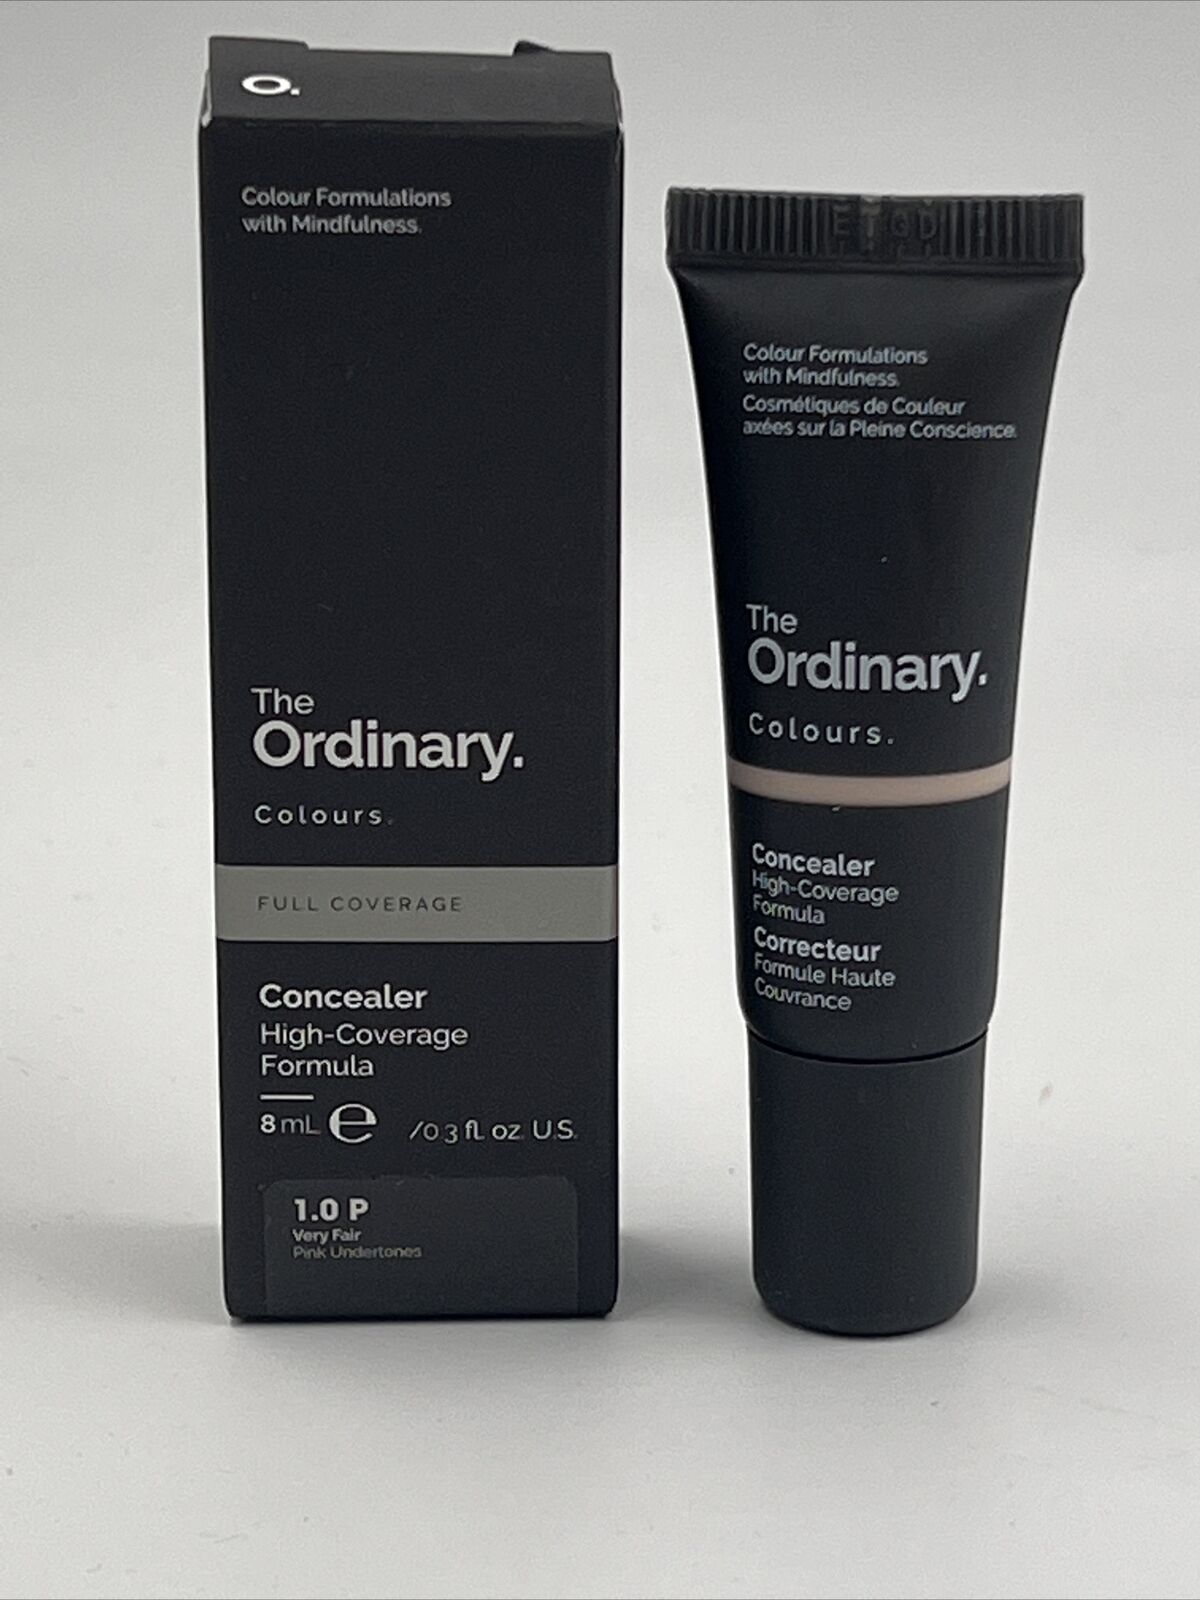 180 x THE ORDINARY CONCEALER 1.0P - 8ML